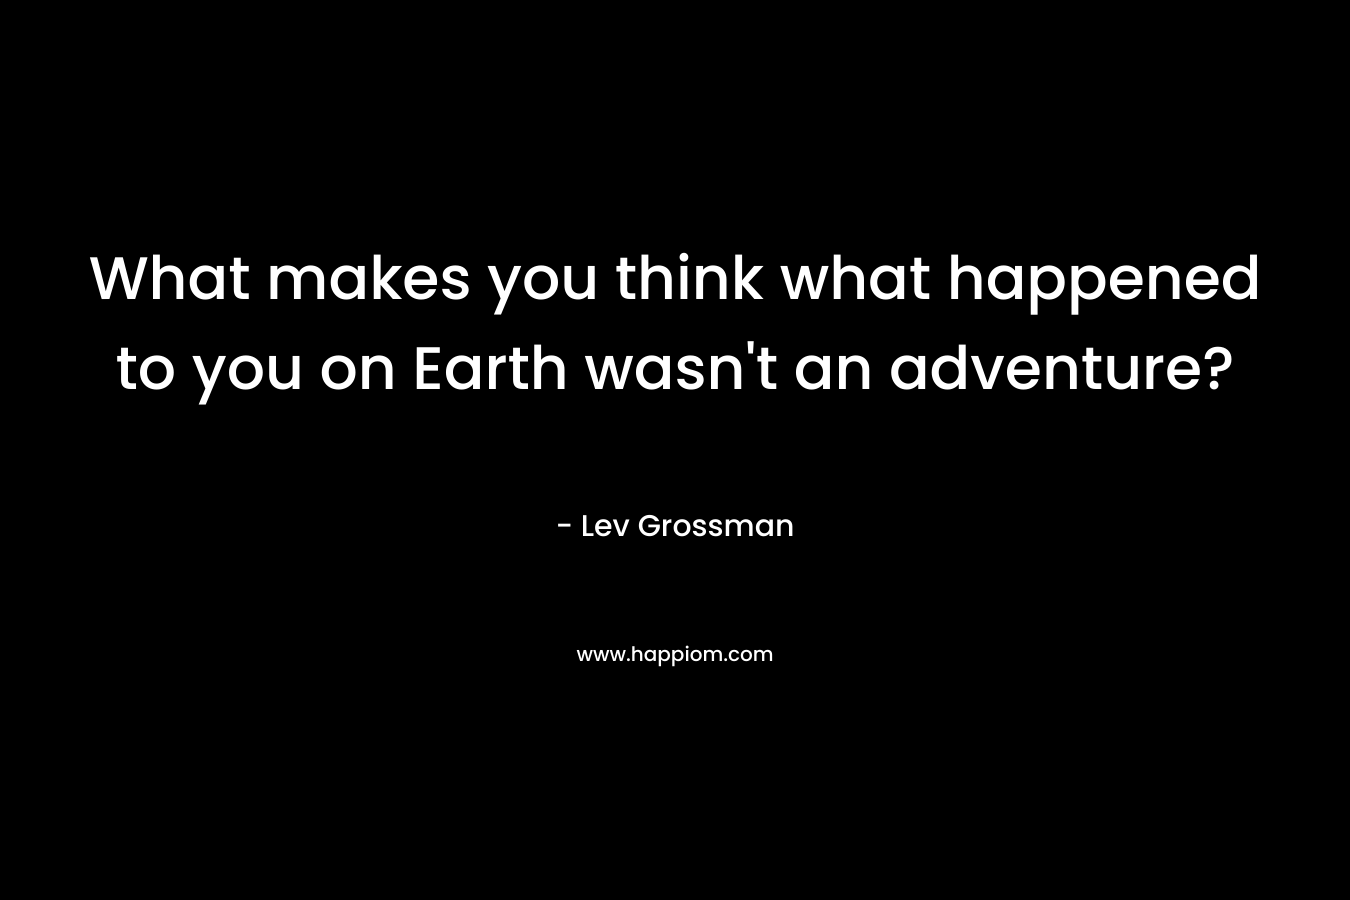 What makes you think what happened to you on Earth wasn’t an adventure? – Lev Grossman